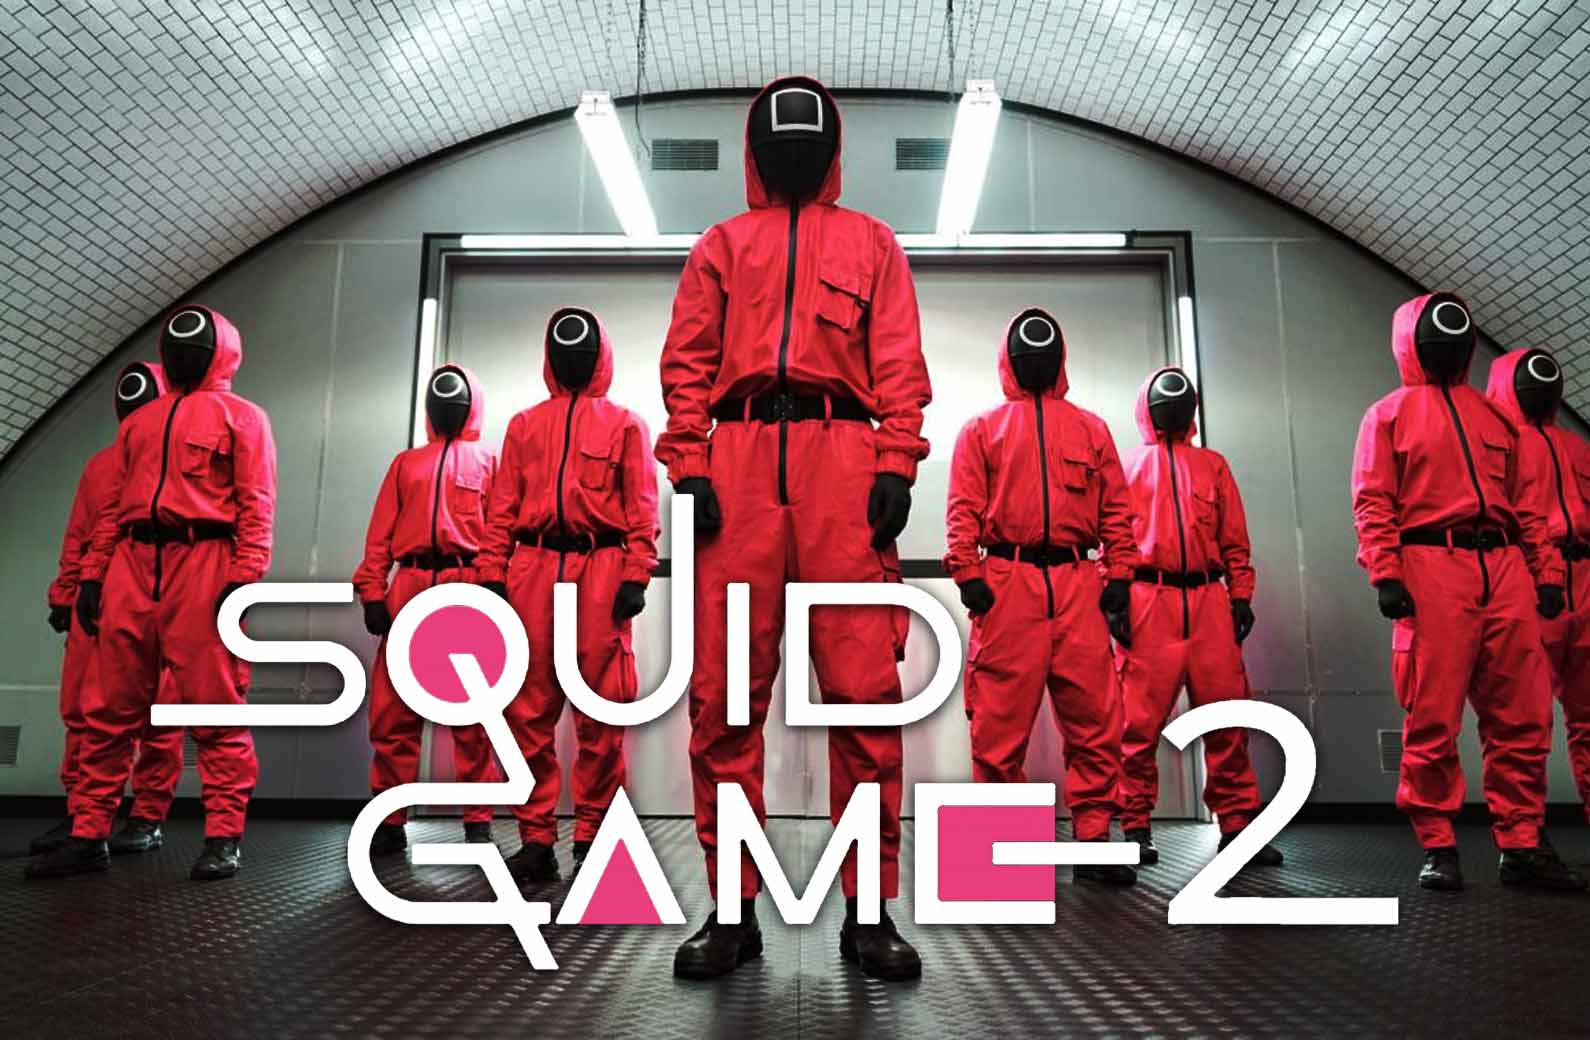 Squid Game Season 2: 'Squid Game' Season 2: All you may want to